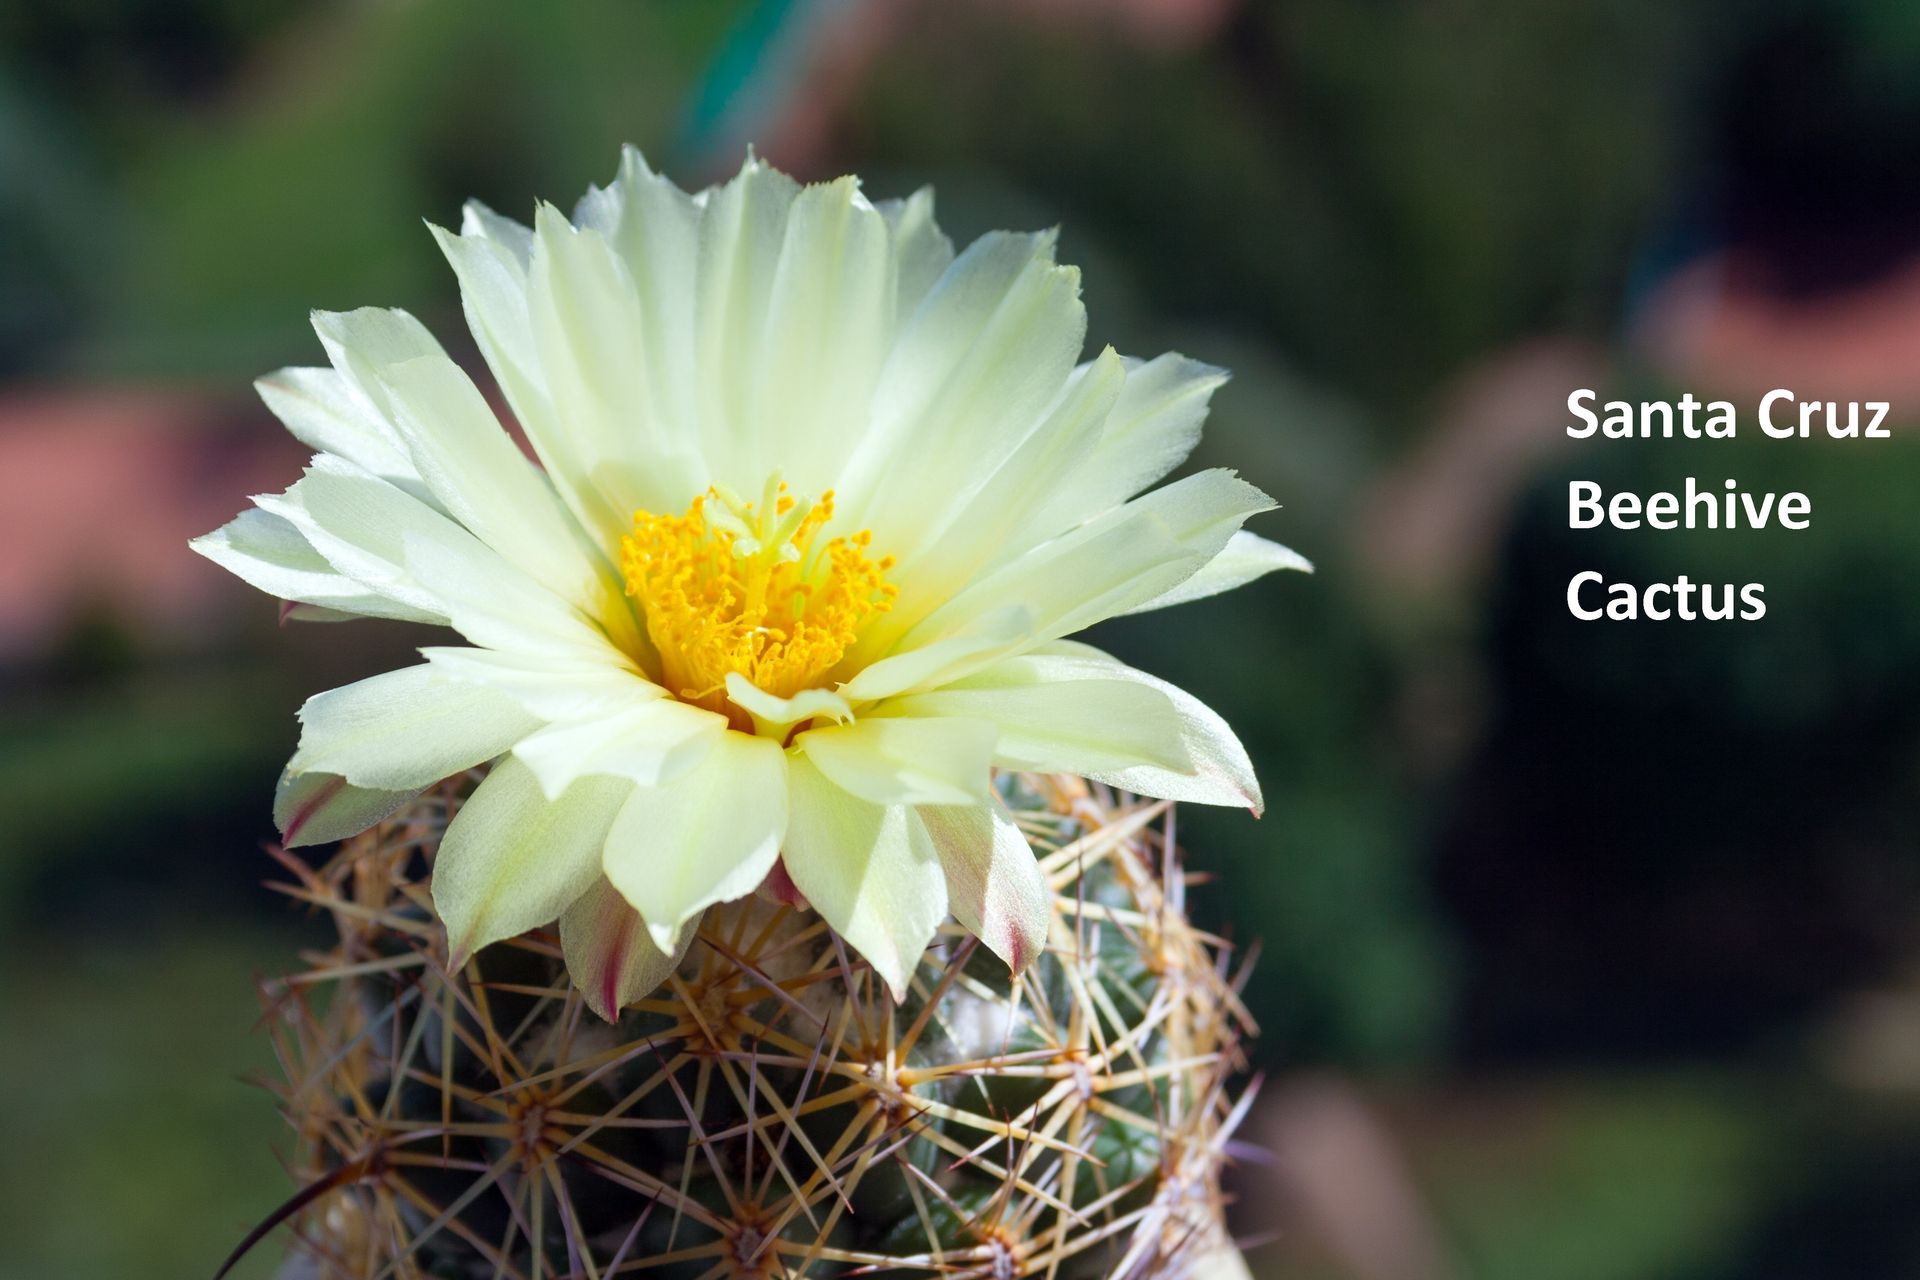 Small Santa Cruz cactus with a whitish yellow flower in bloom